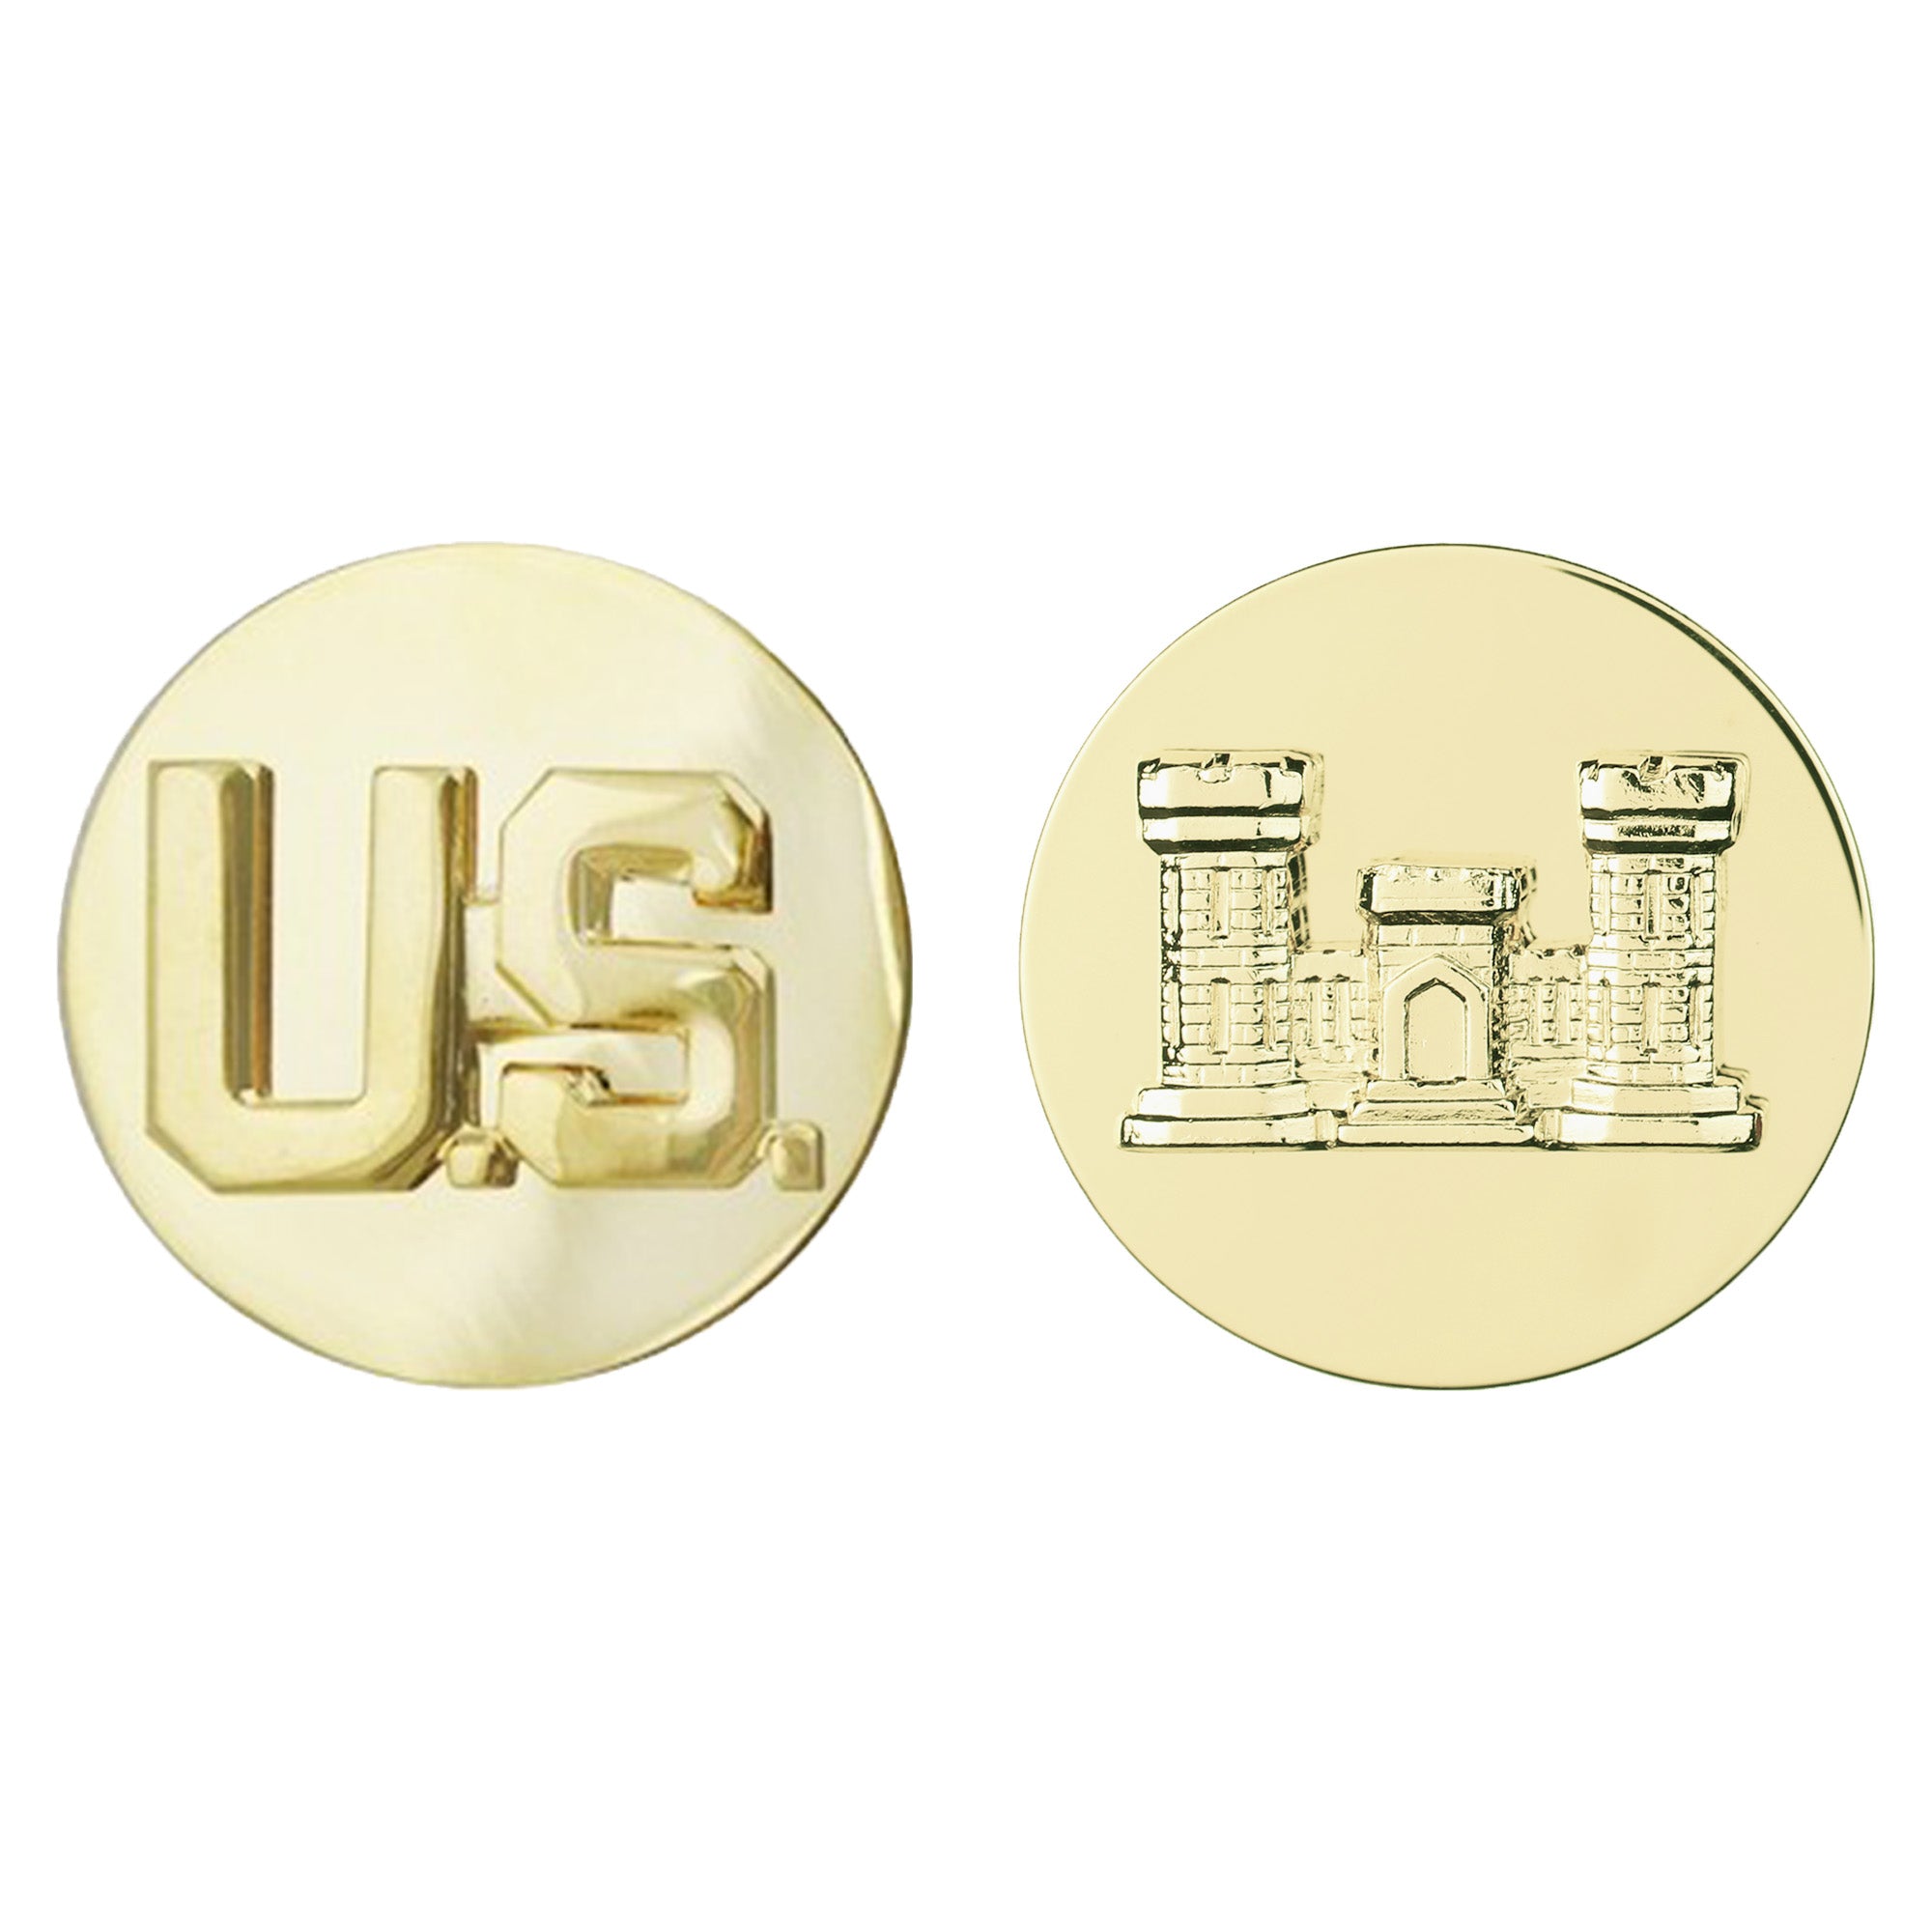 Engineer & U.S. Enlisted Brite Pin-on - Insignia Depot